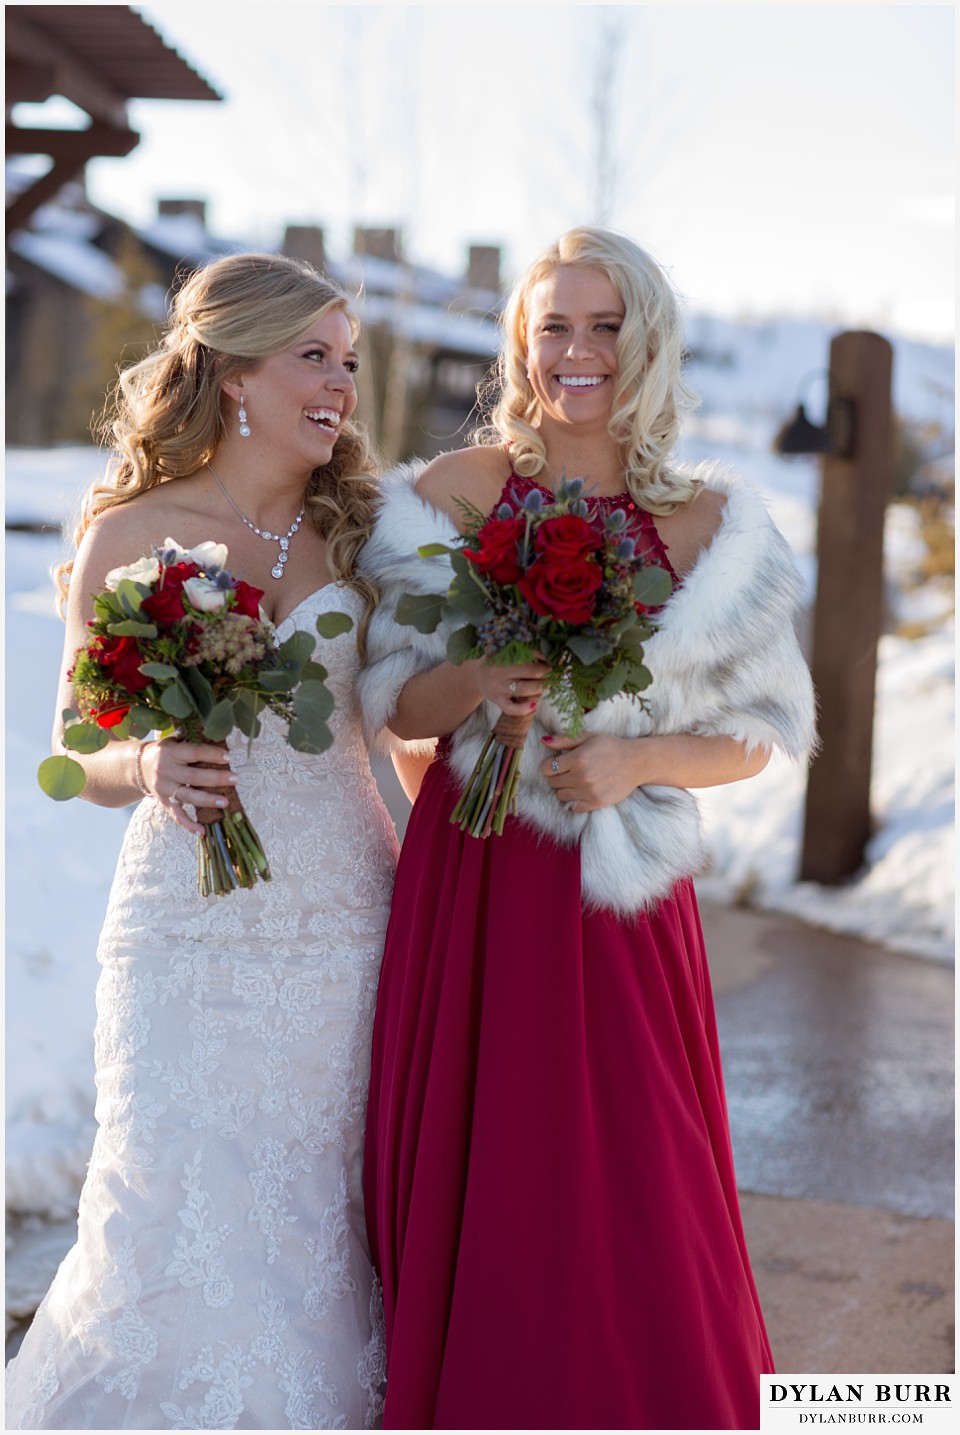 devils thumb ranch wedding in winter bride maid of honor sisters